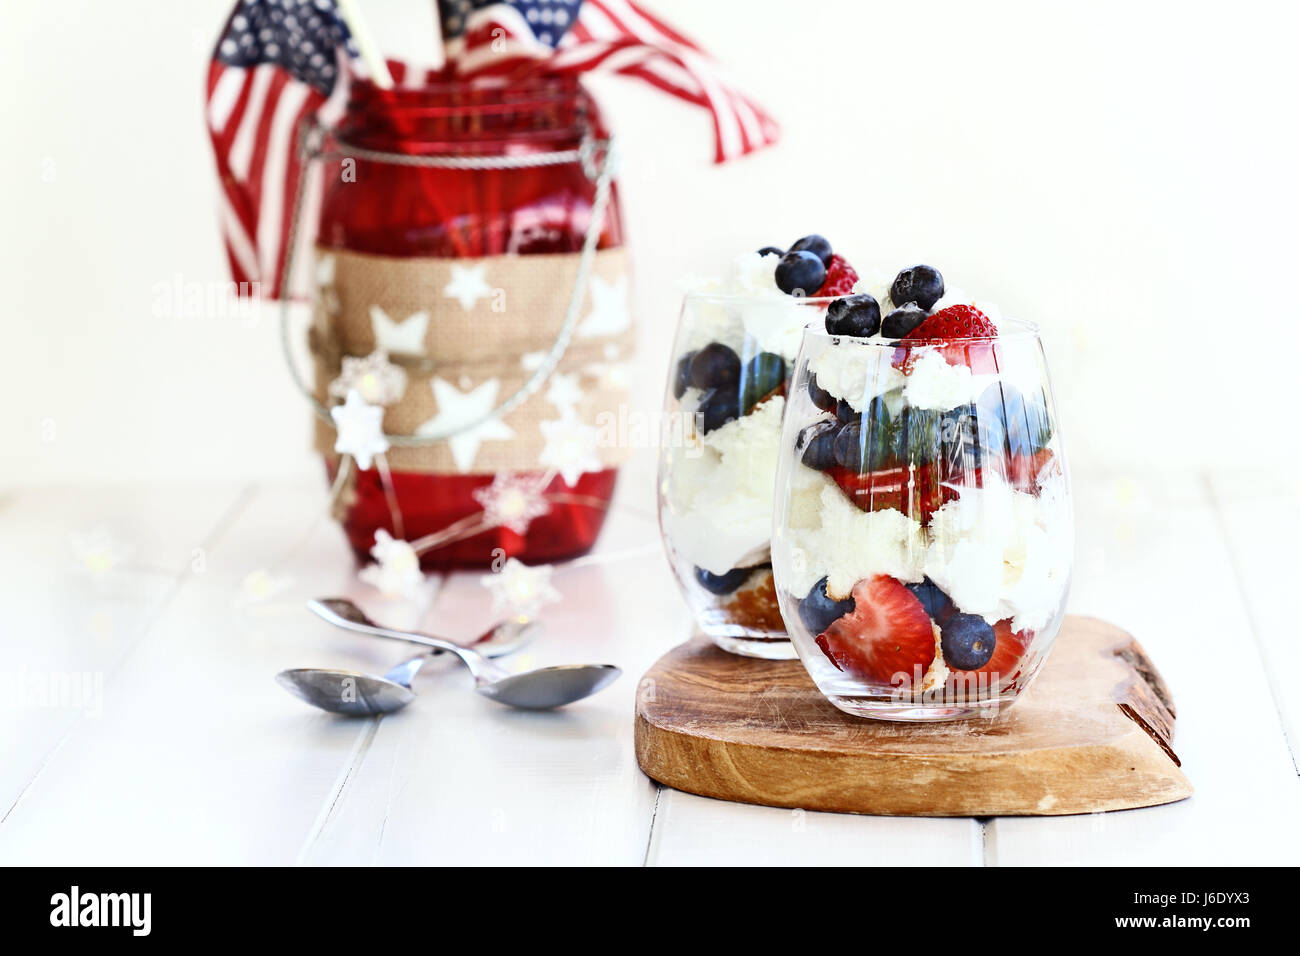 Trifle Made With Blueberries Strawberries Whipped Cream And Star Shaped Pound Cake With 2589